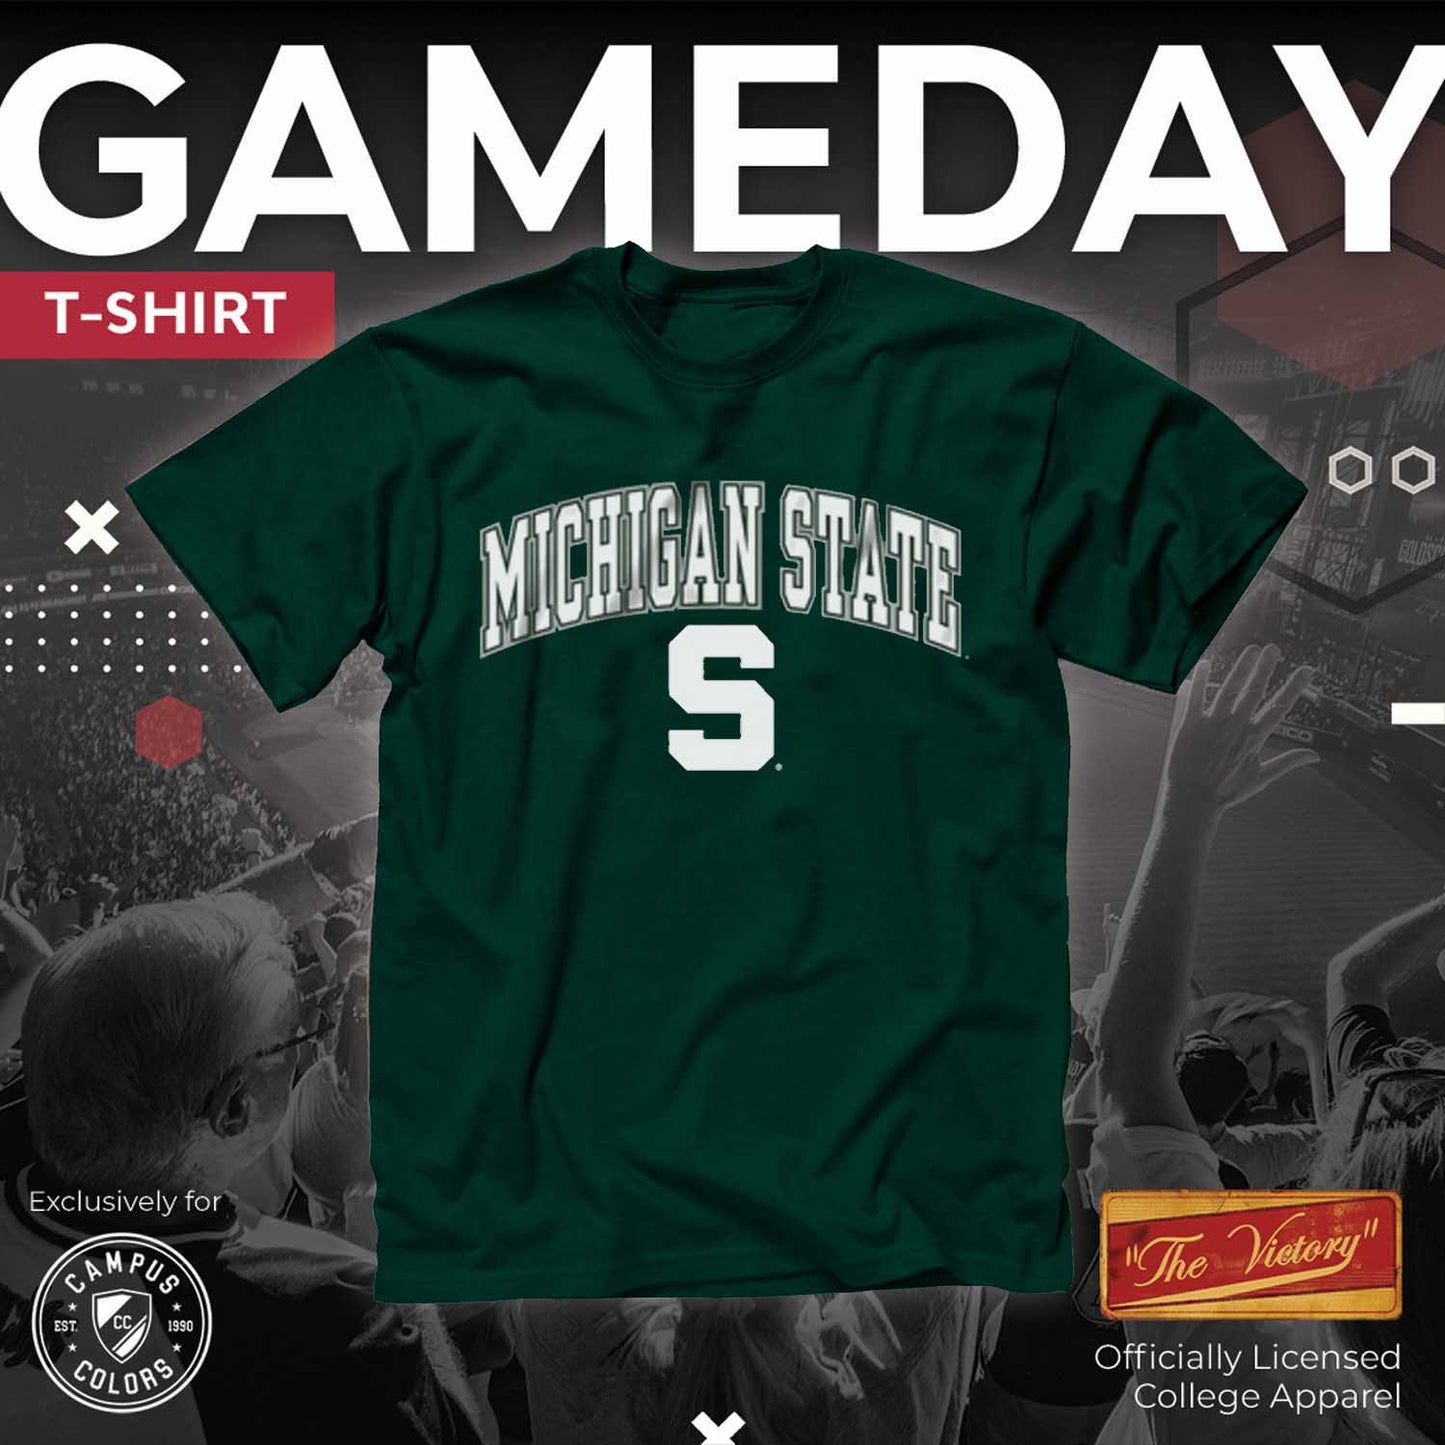 Michigan State Spartans NCAA Adult Gameday Cotton T-Shirt - Green